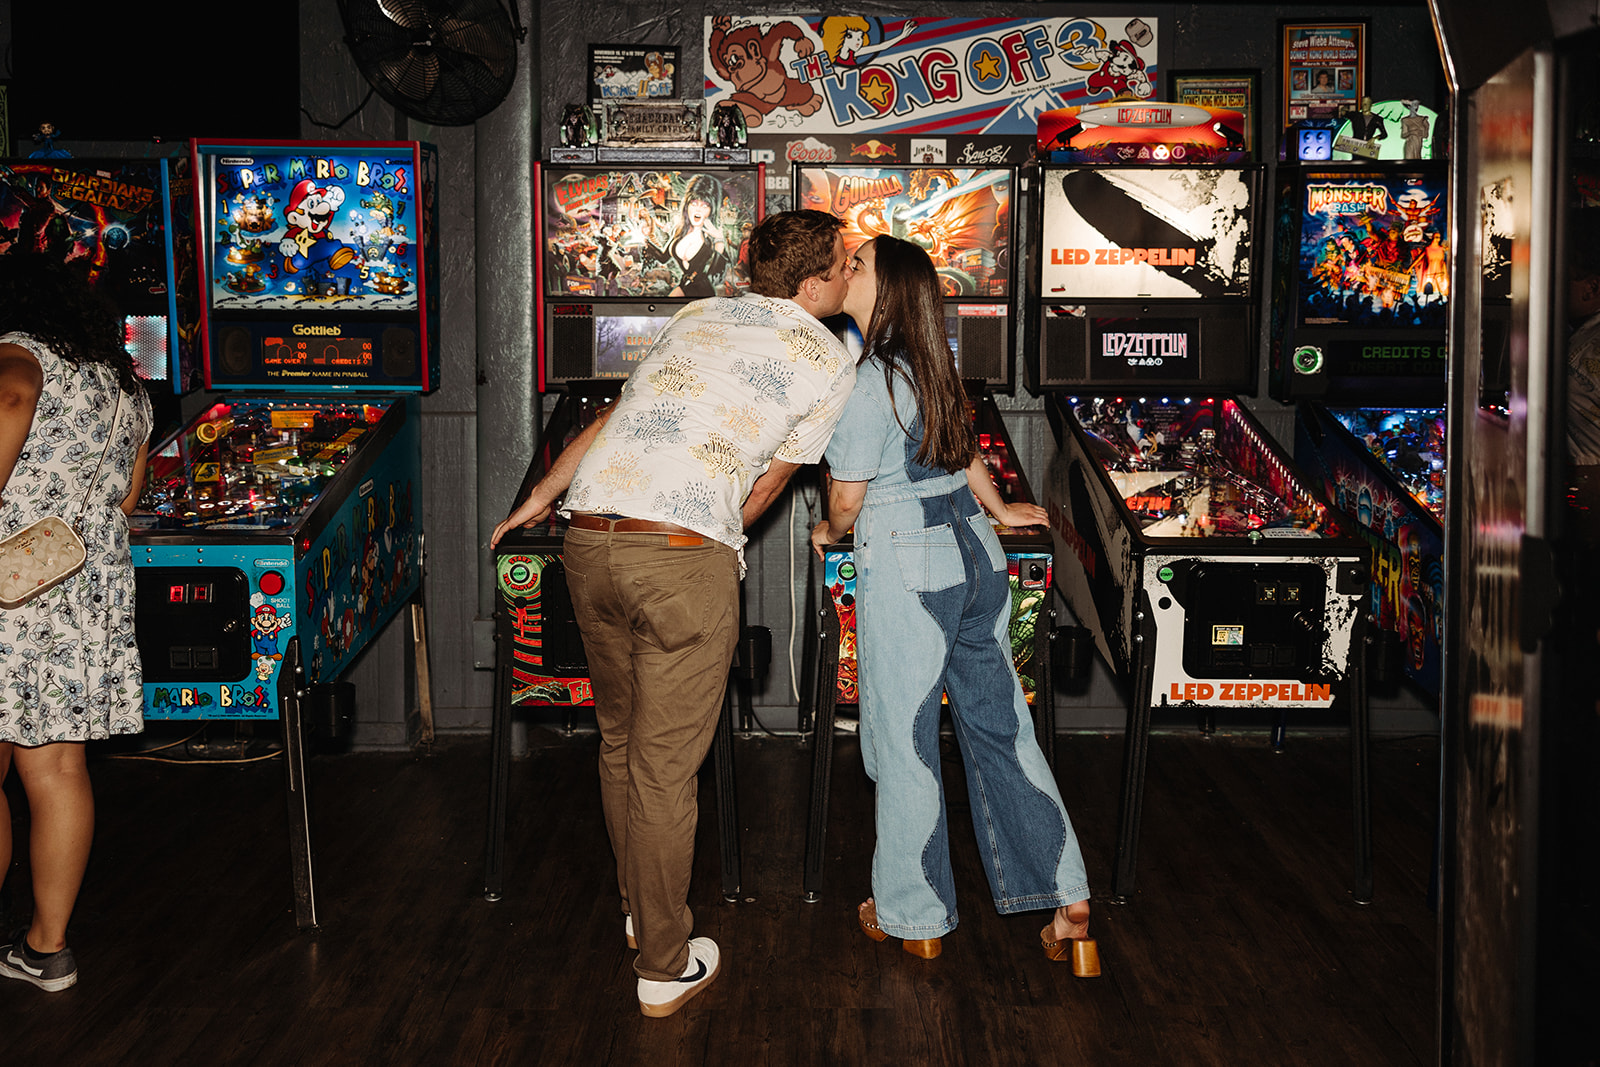 Couple kissing in front of a pinball machine with their backs facing the camera